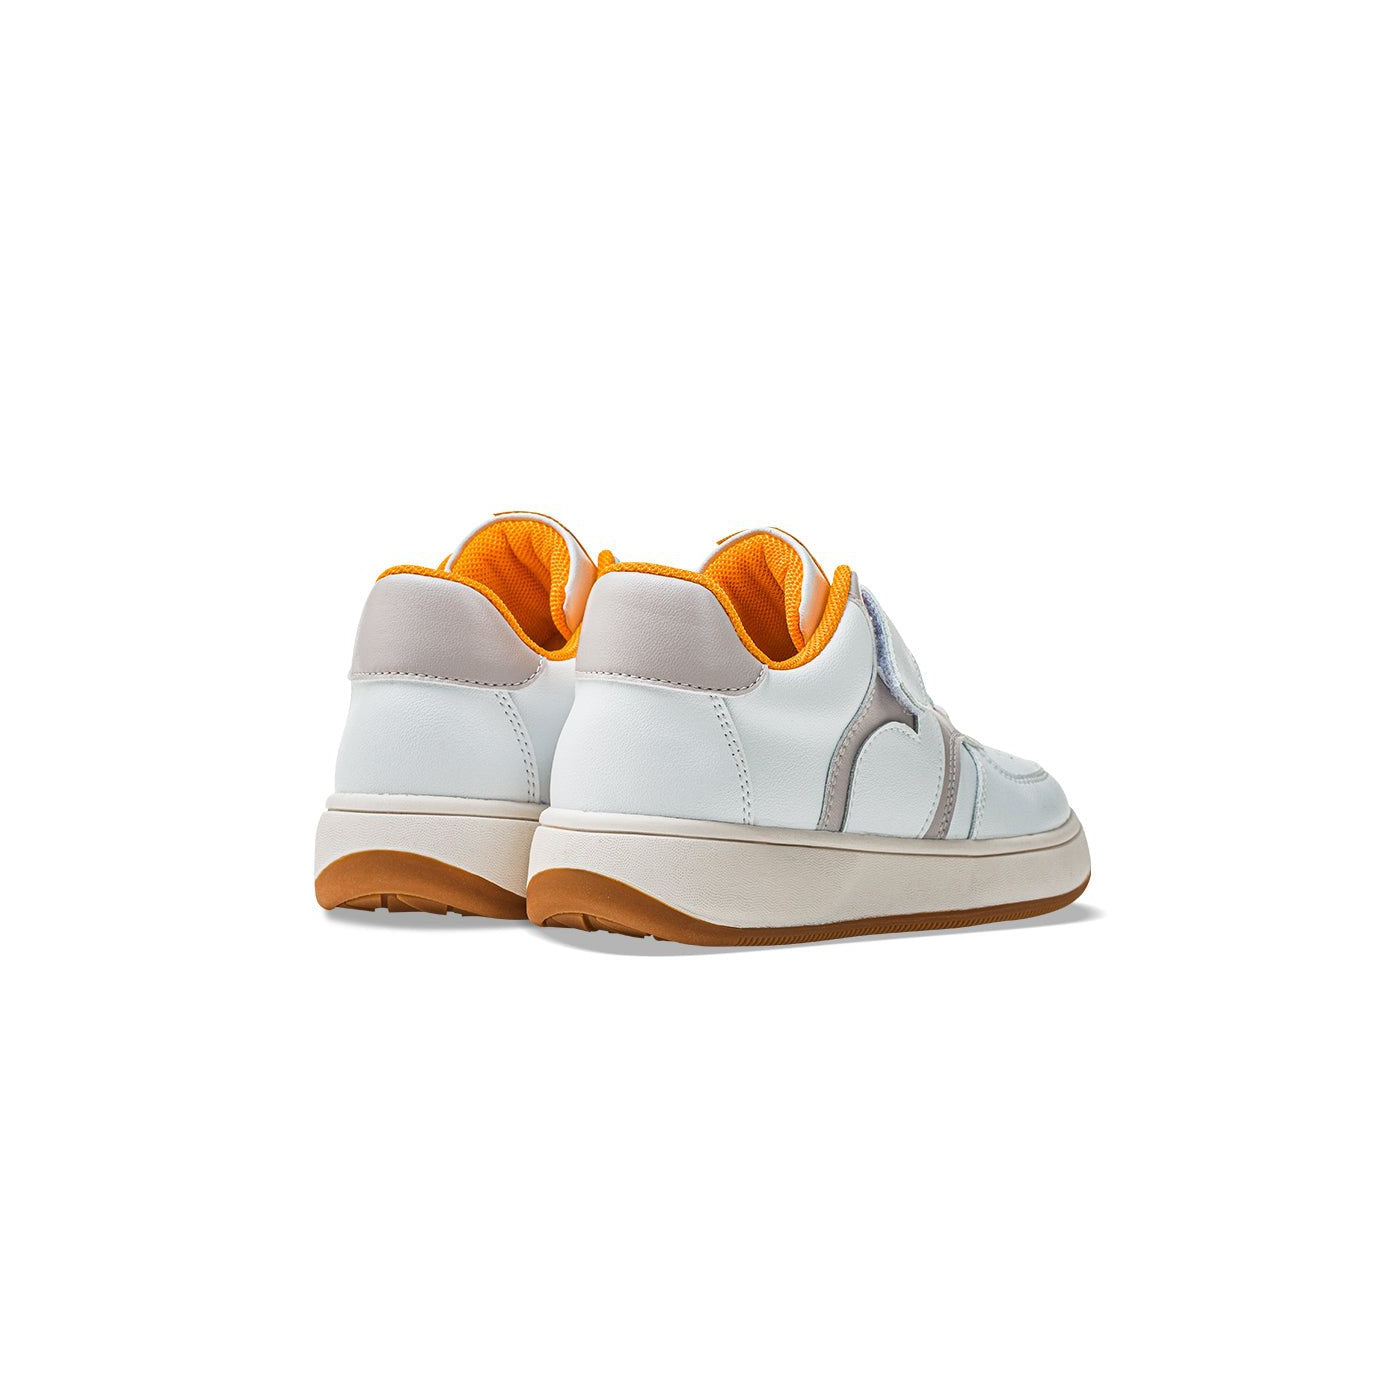 Elevate Fleece Lined Kids White Everyday Sneakers - 0cm